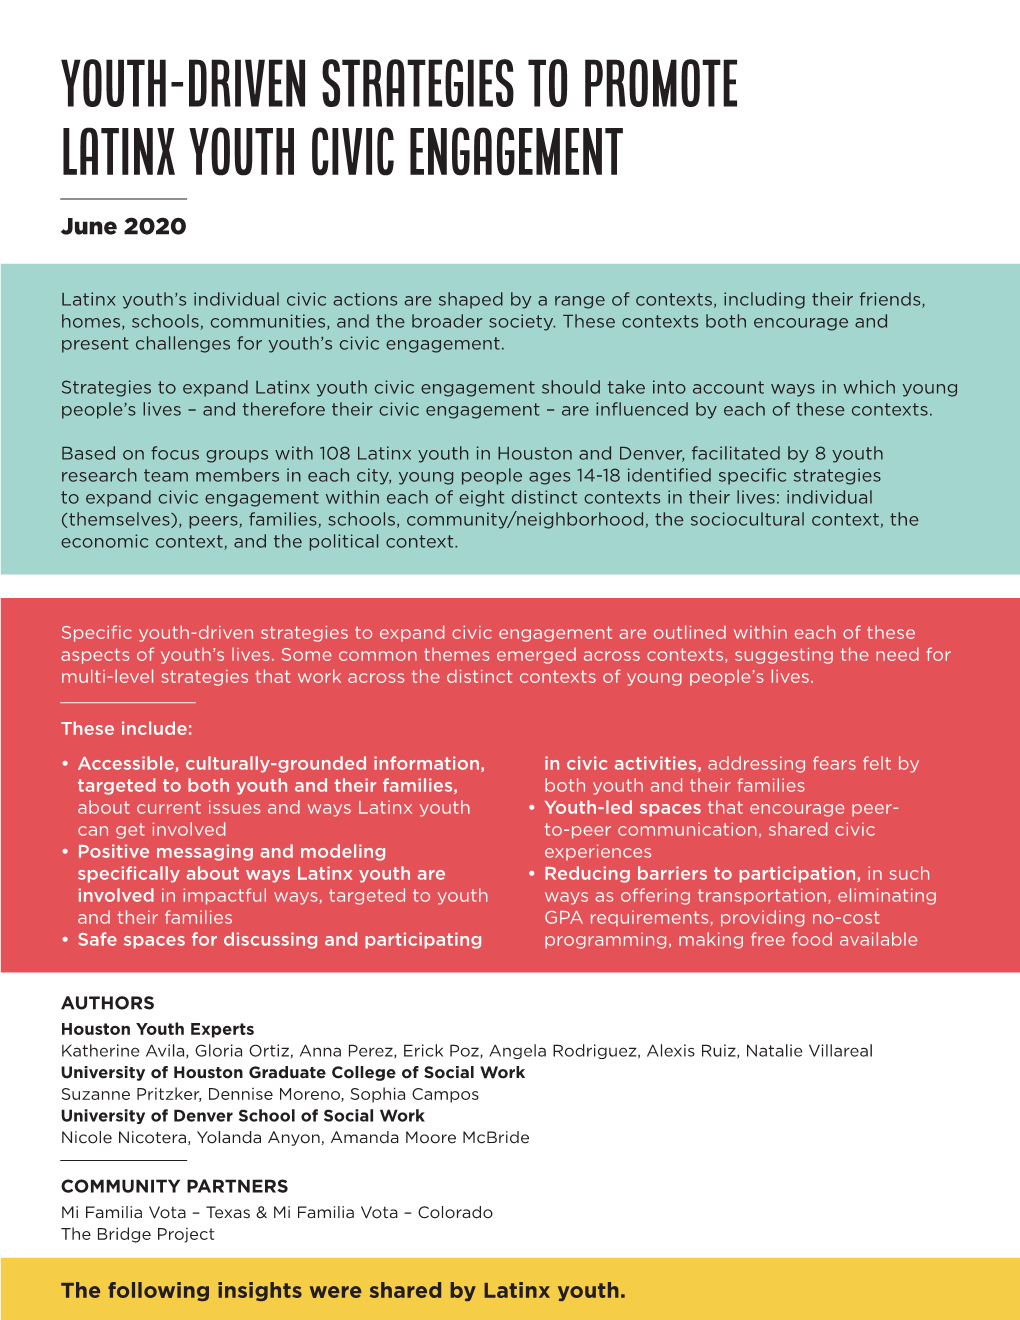 Youth-Driven Strategies to Promote Latinx Youth Civic Engagement